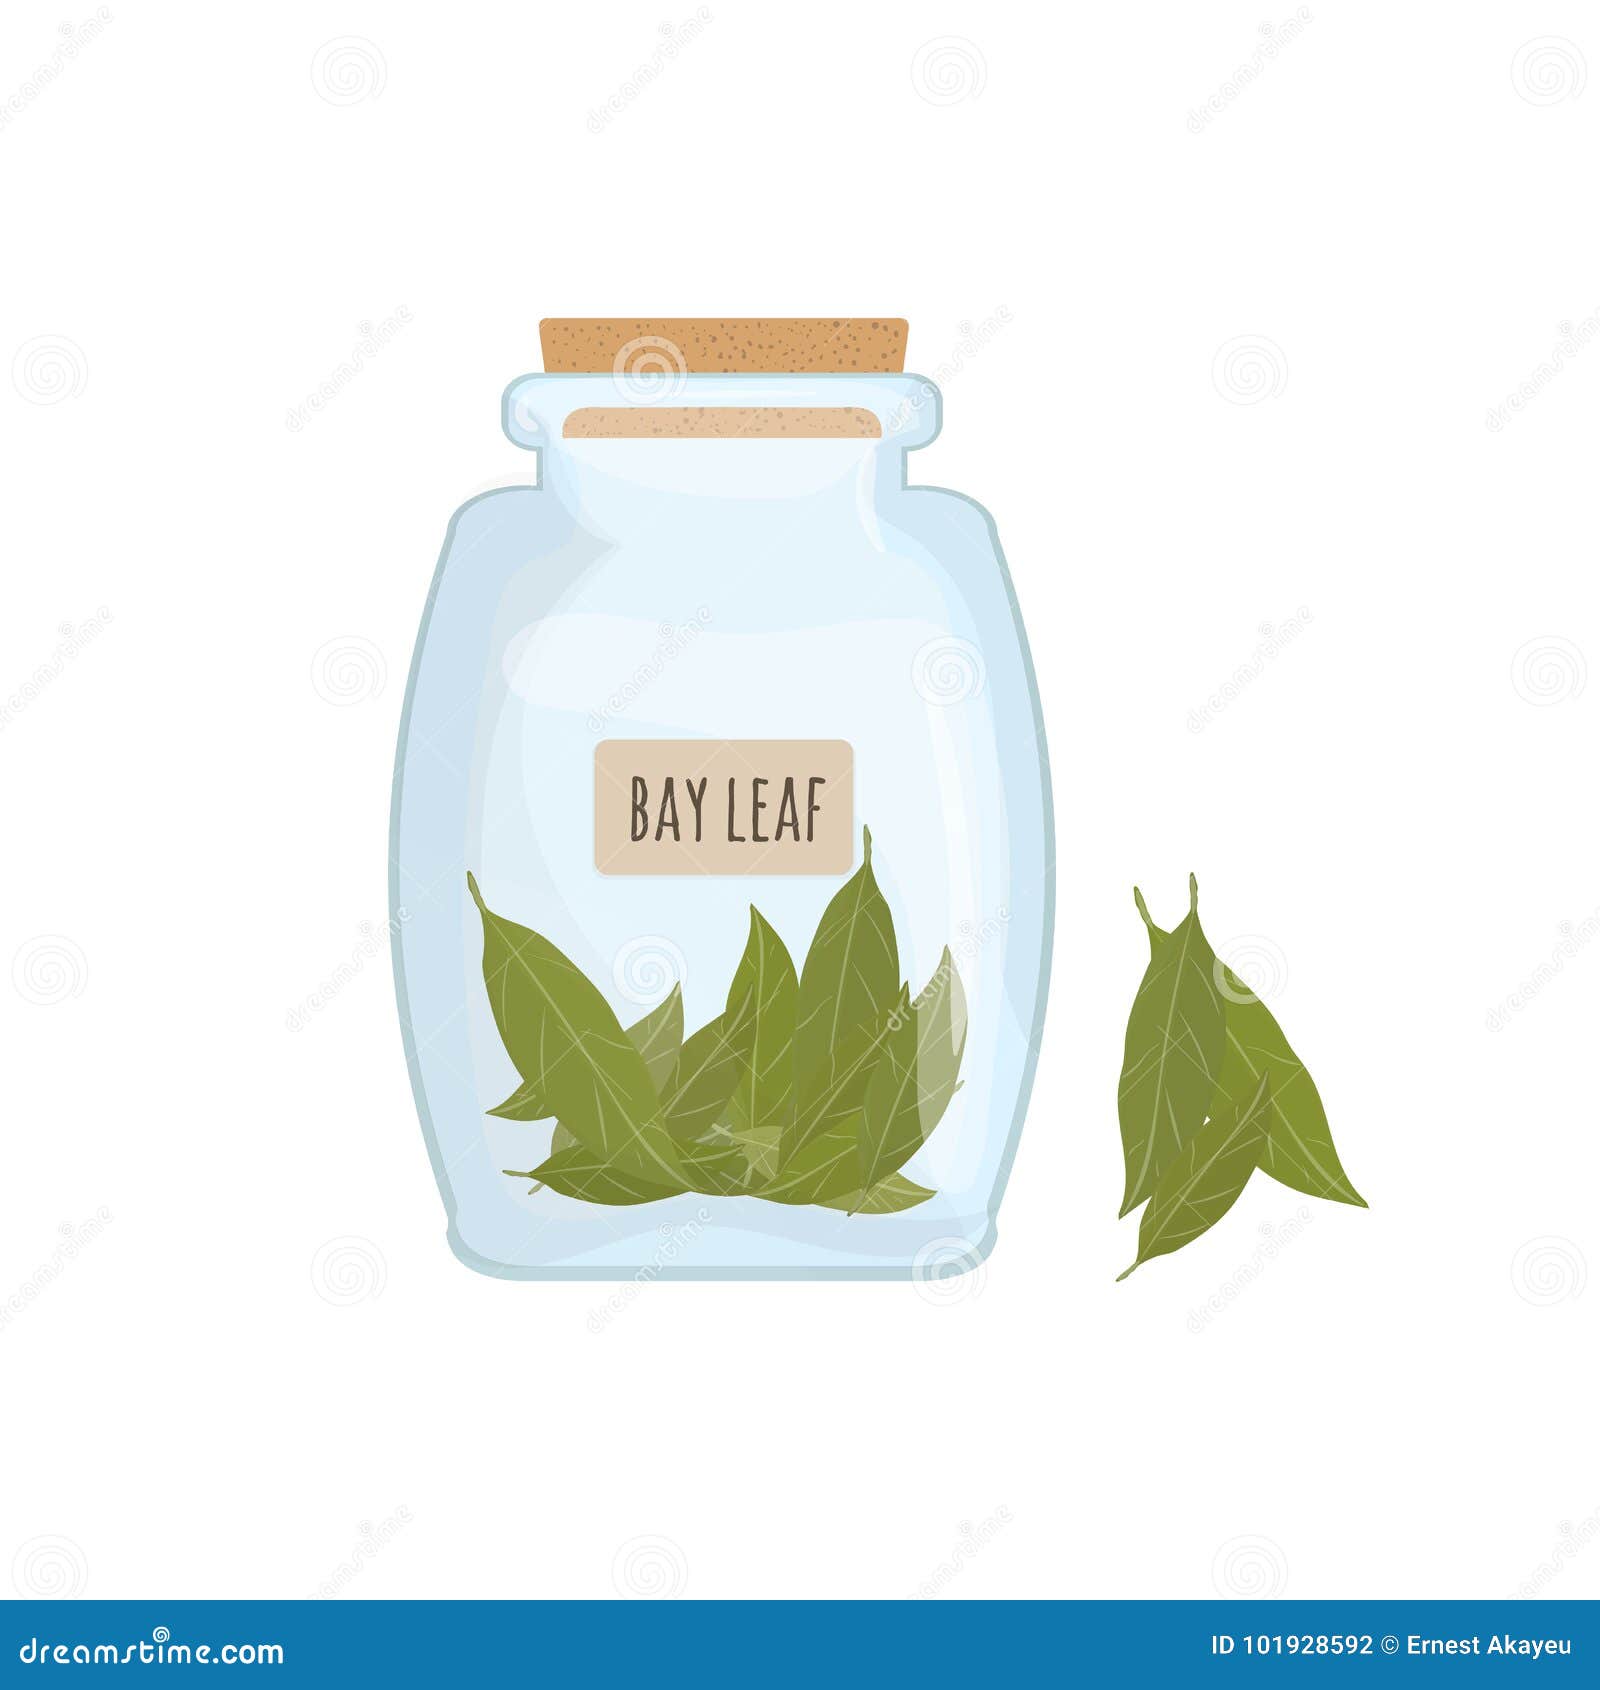 dried bay leaves stored in clear jar  on white background. piquant condiment with pungent smell, food spice